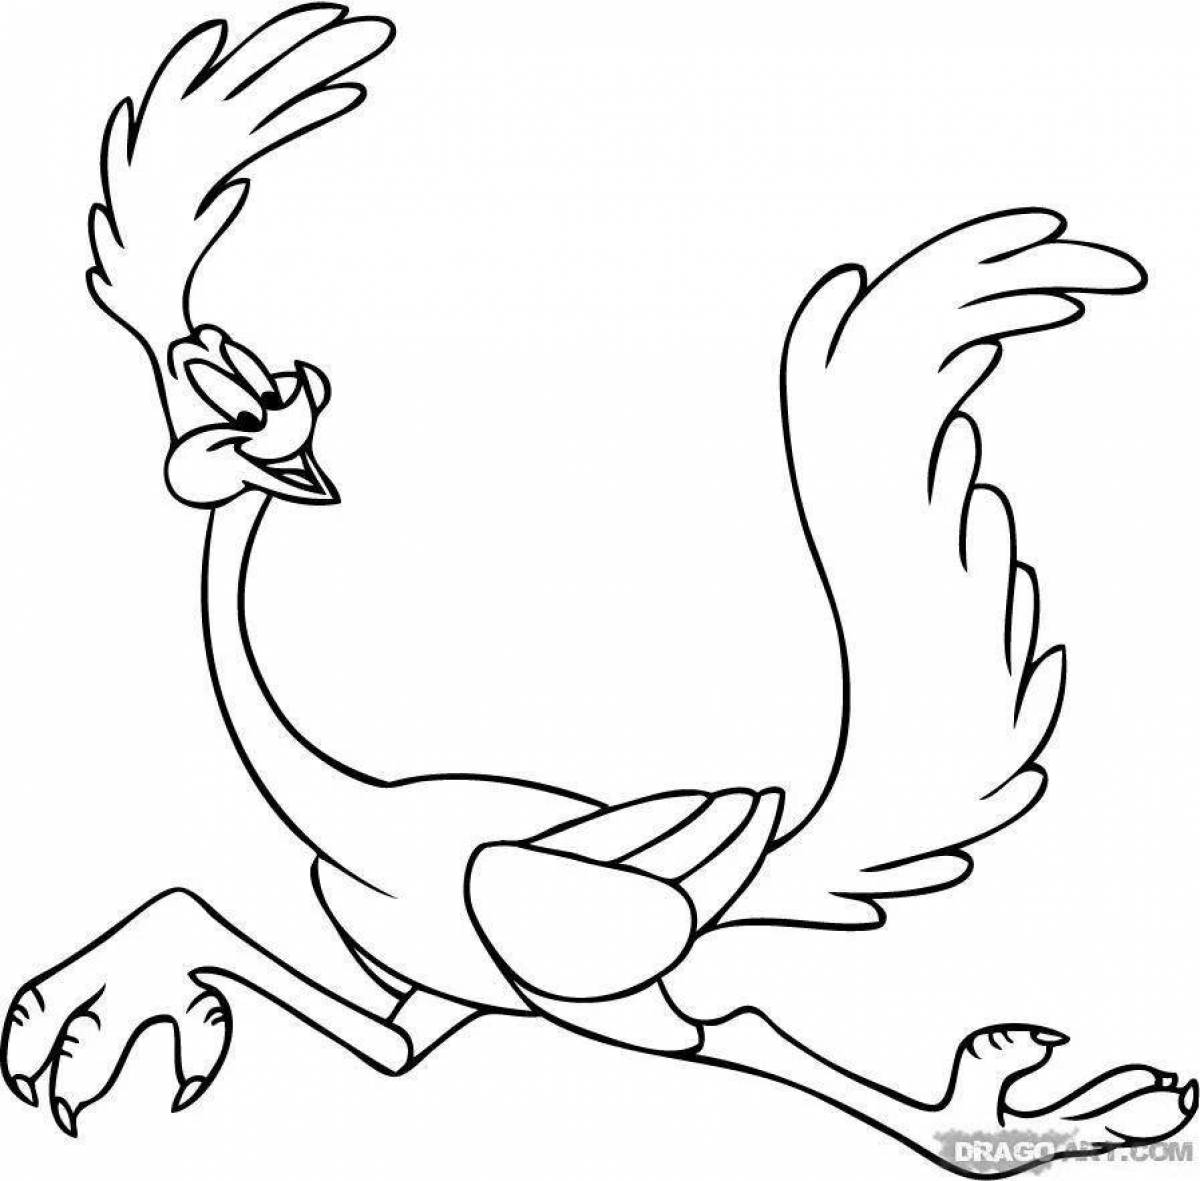 Color-lively road runner coloring page